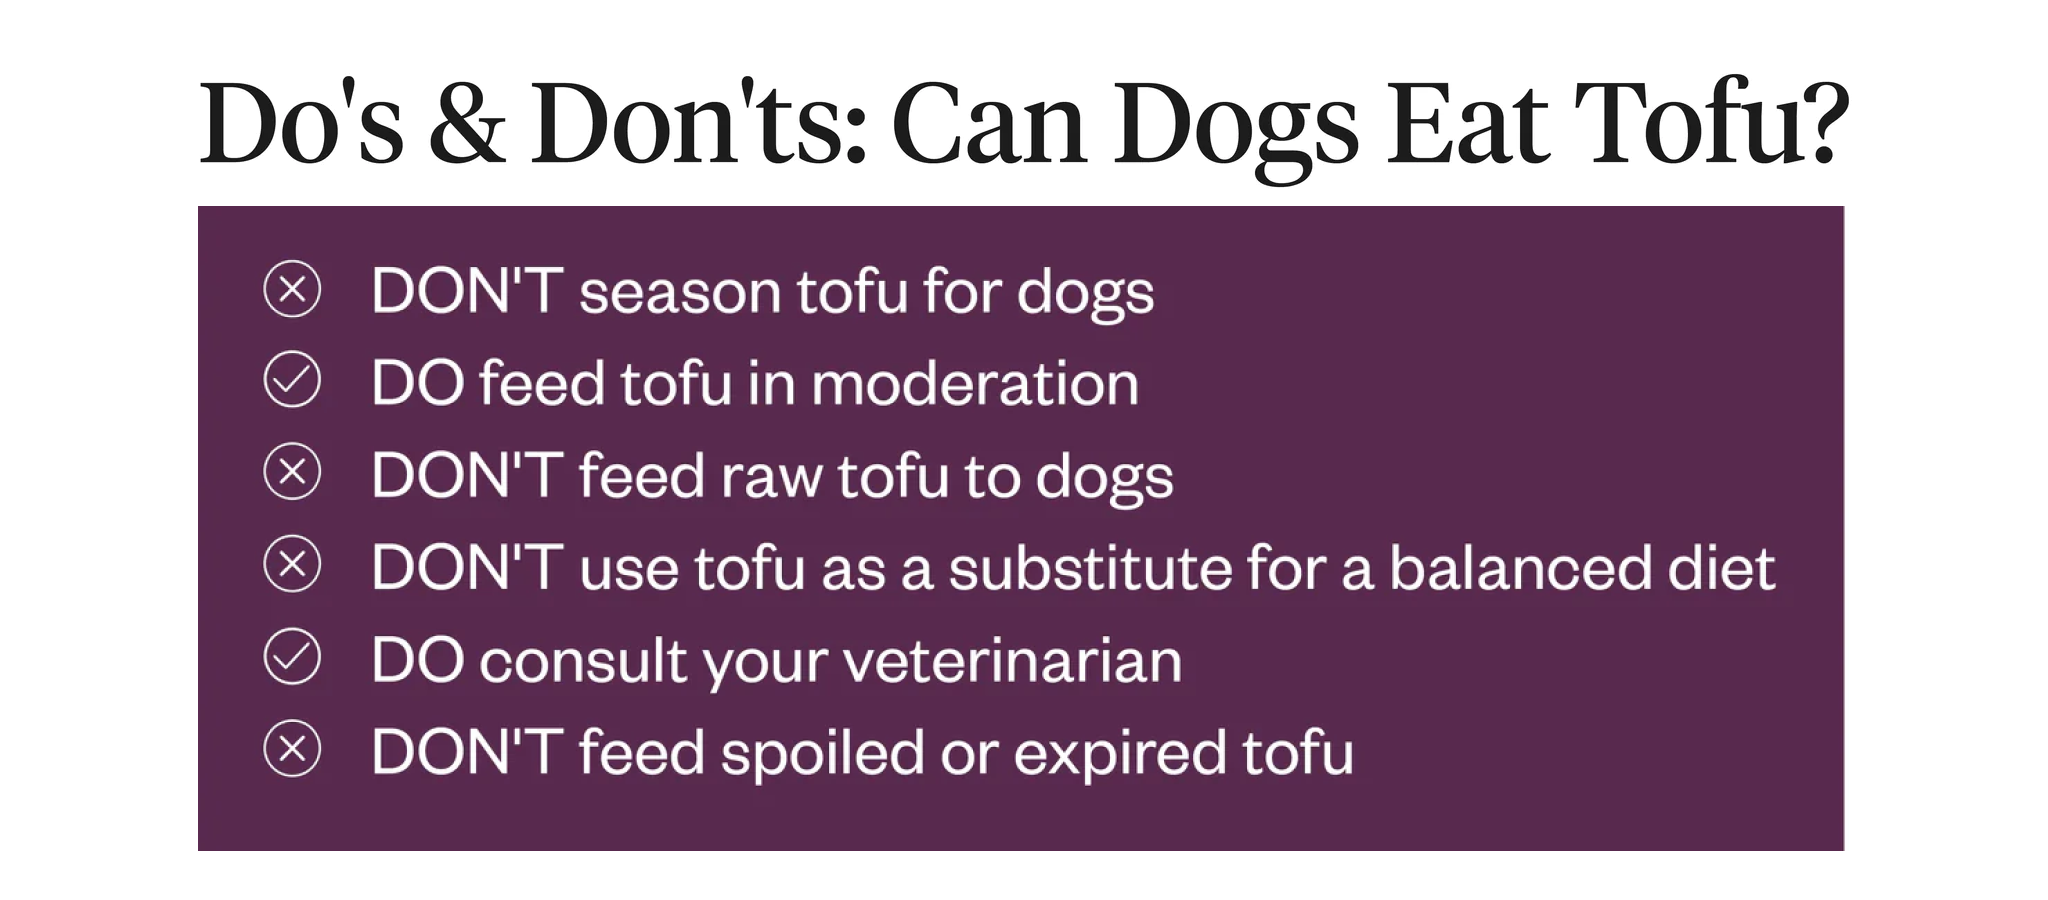 Do’s and Don’ts of feeding dogs tofu